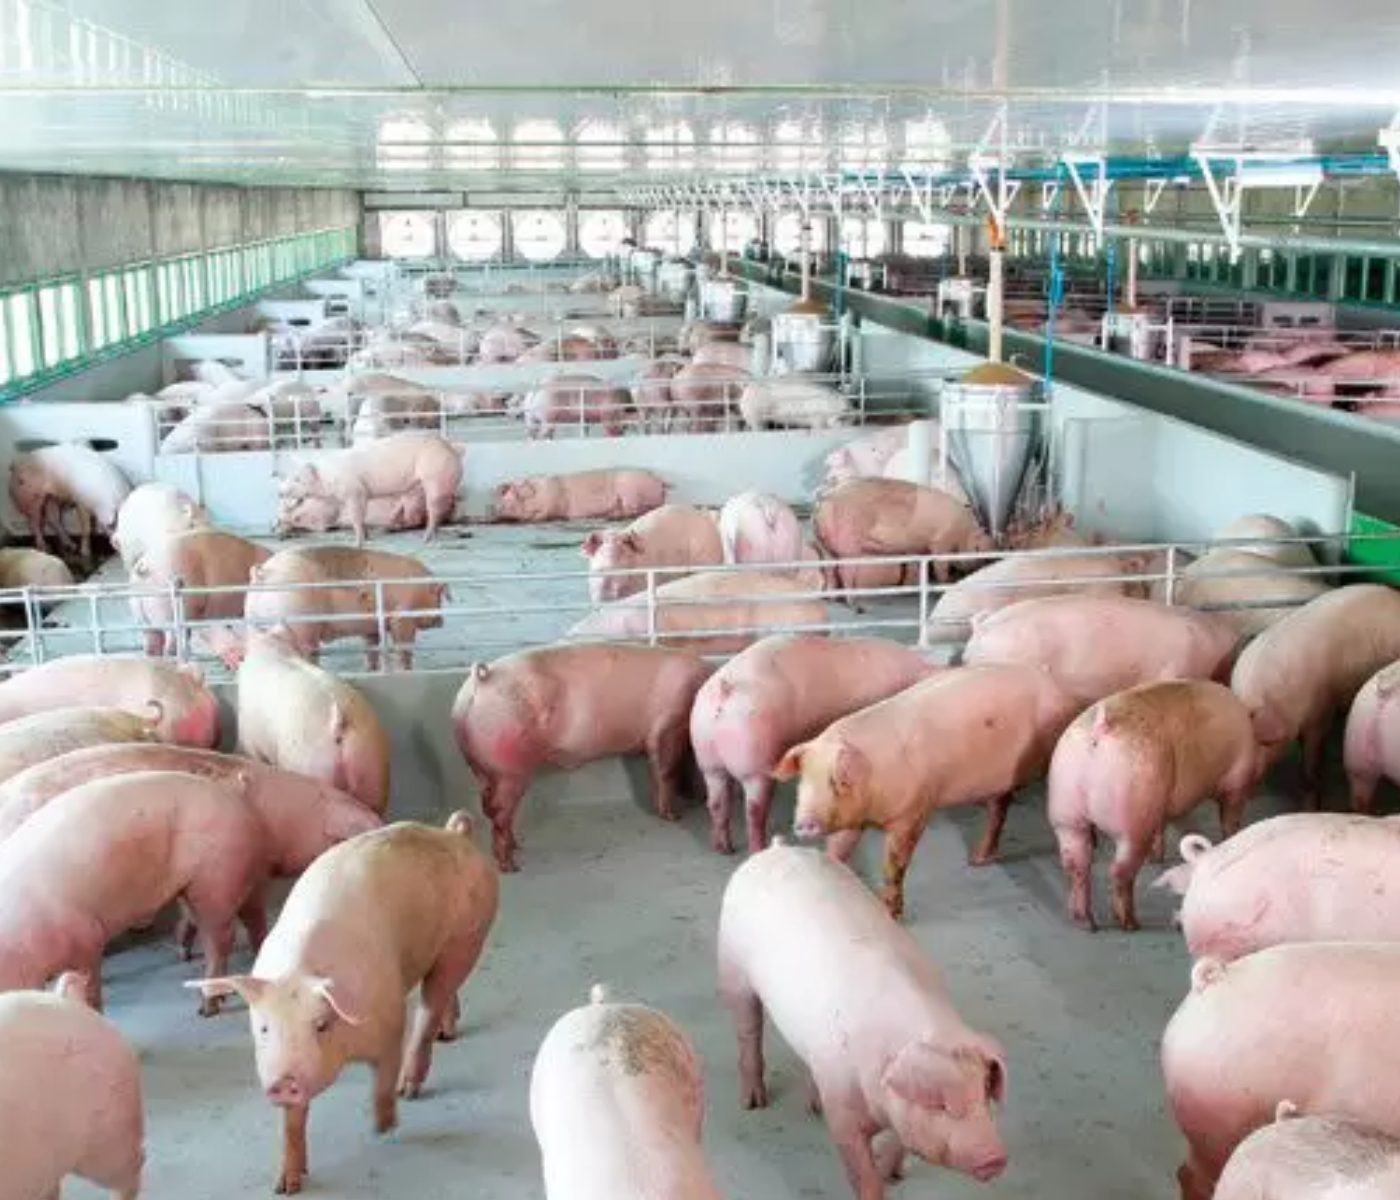 Animal welfare: Establishing a reliable evaluation system for pigs